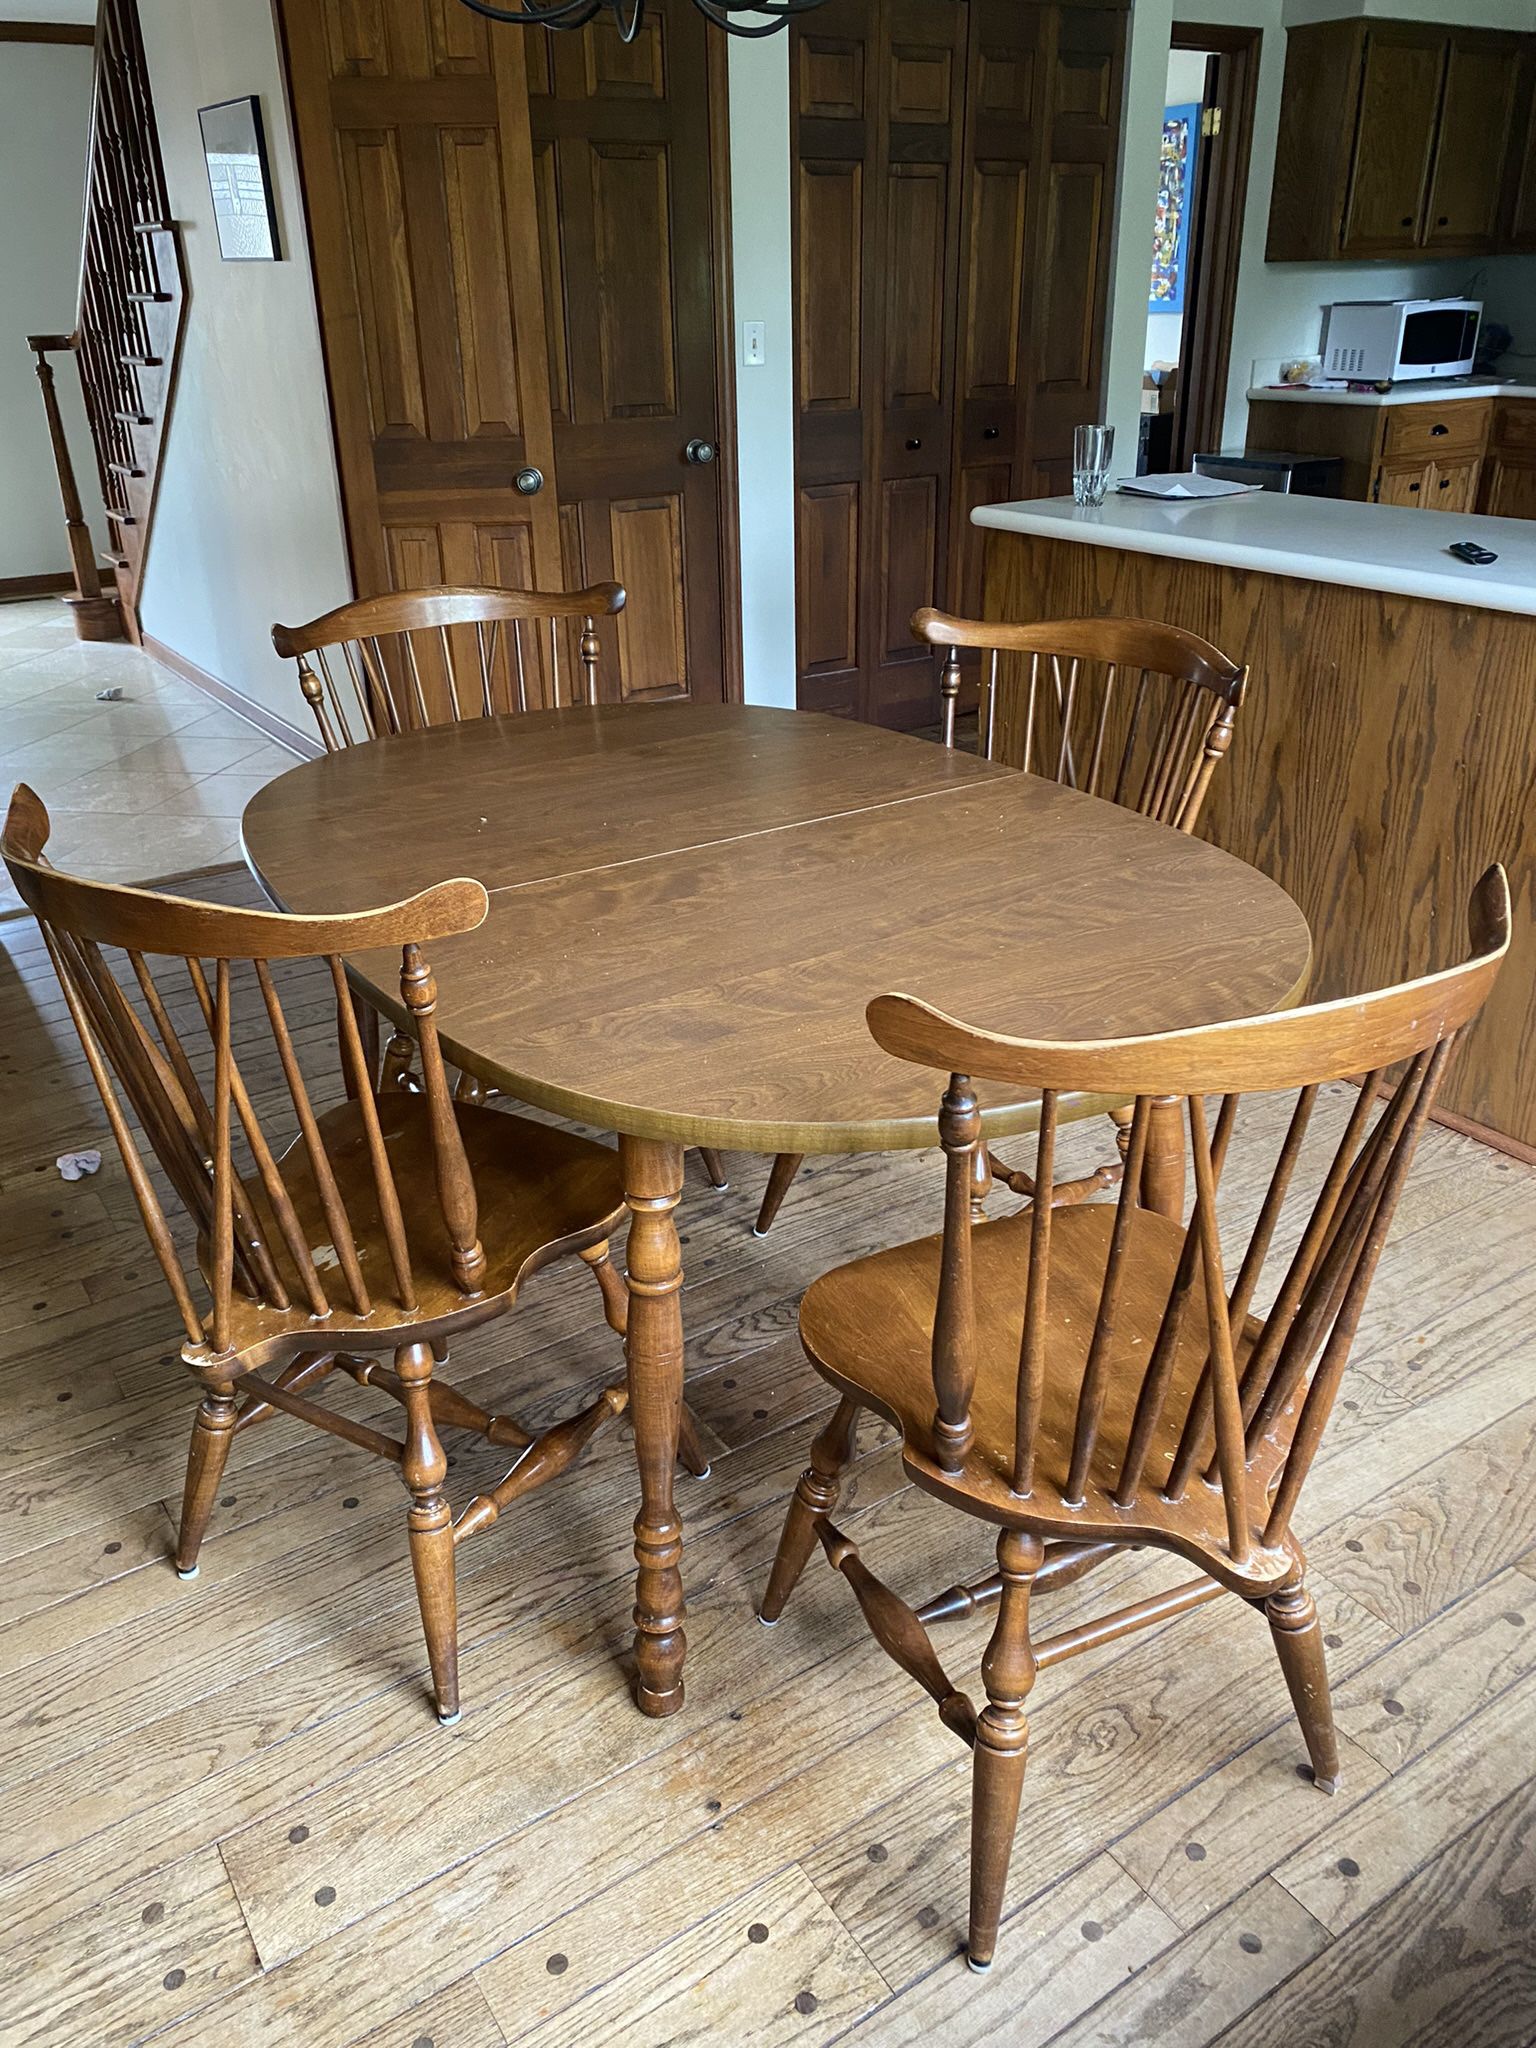 Kitchen Table And Wood Moosehead Fiddleback Chairs